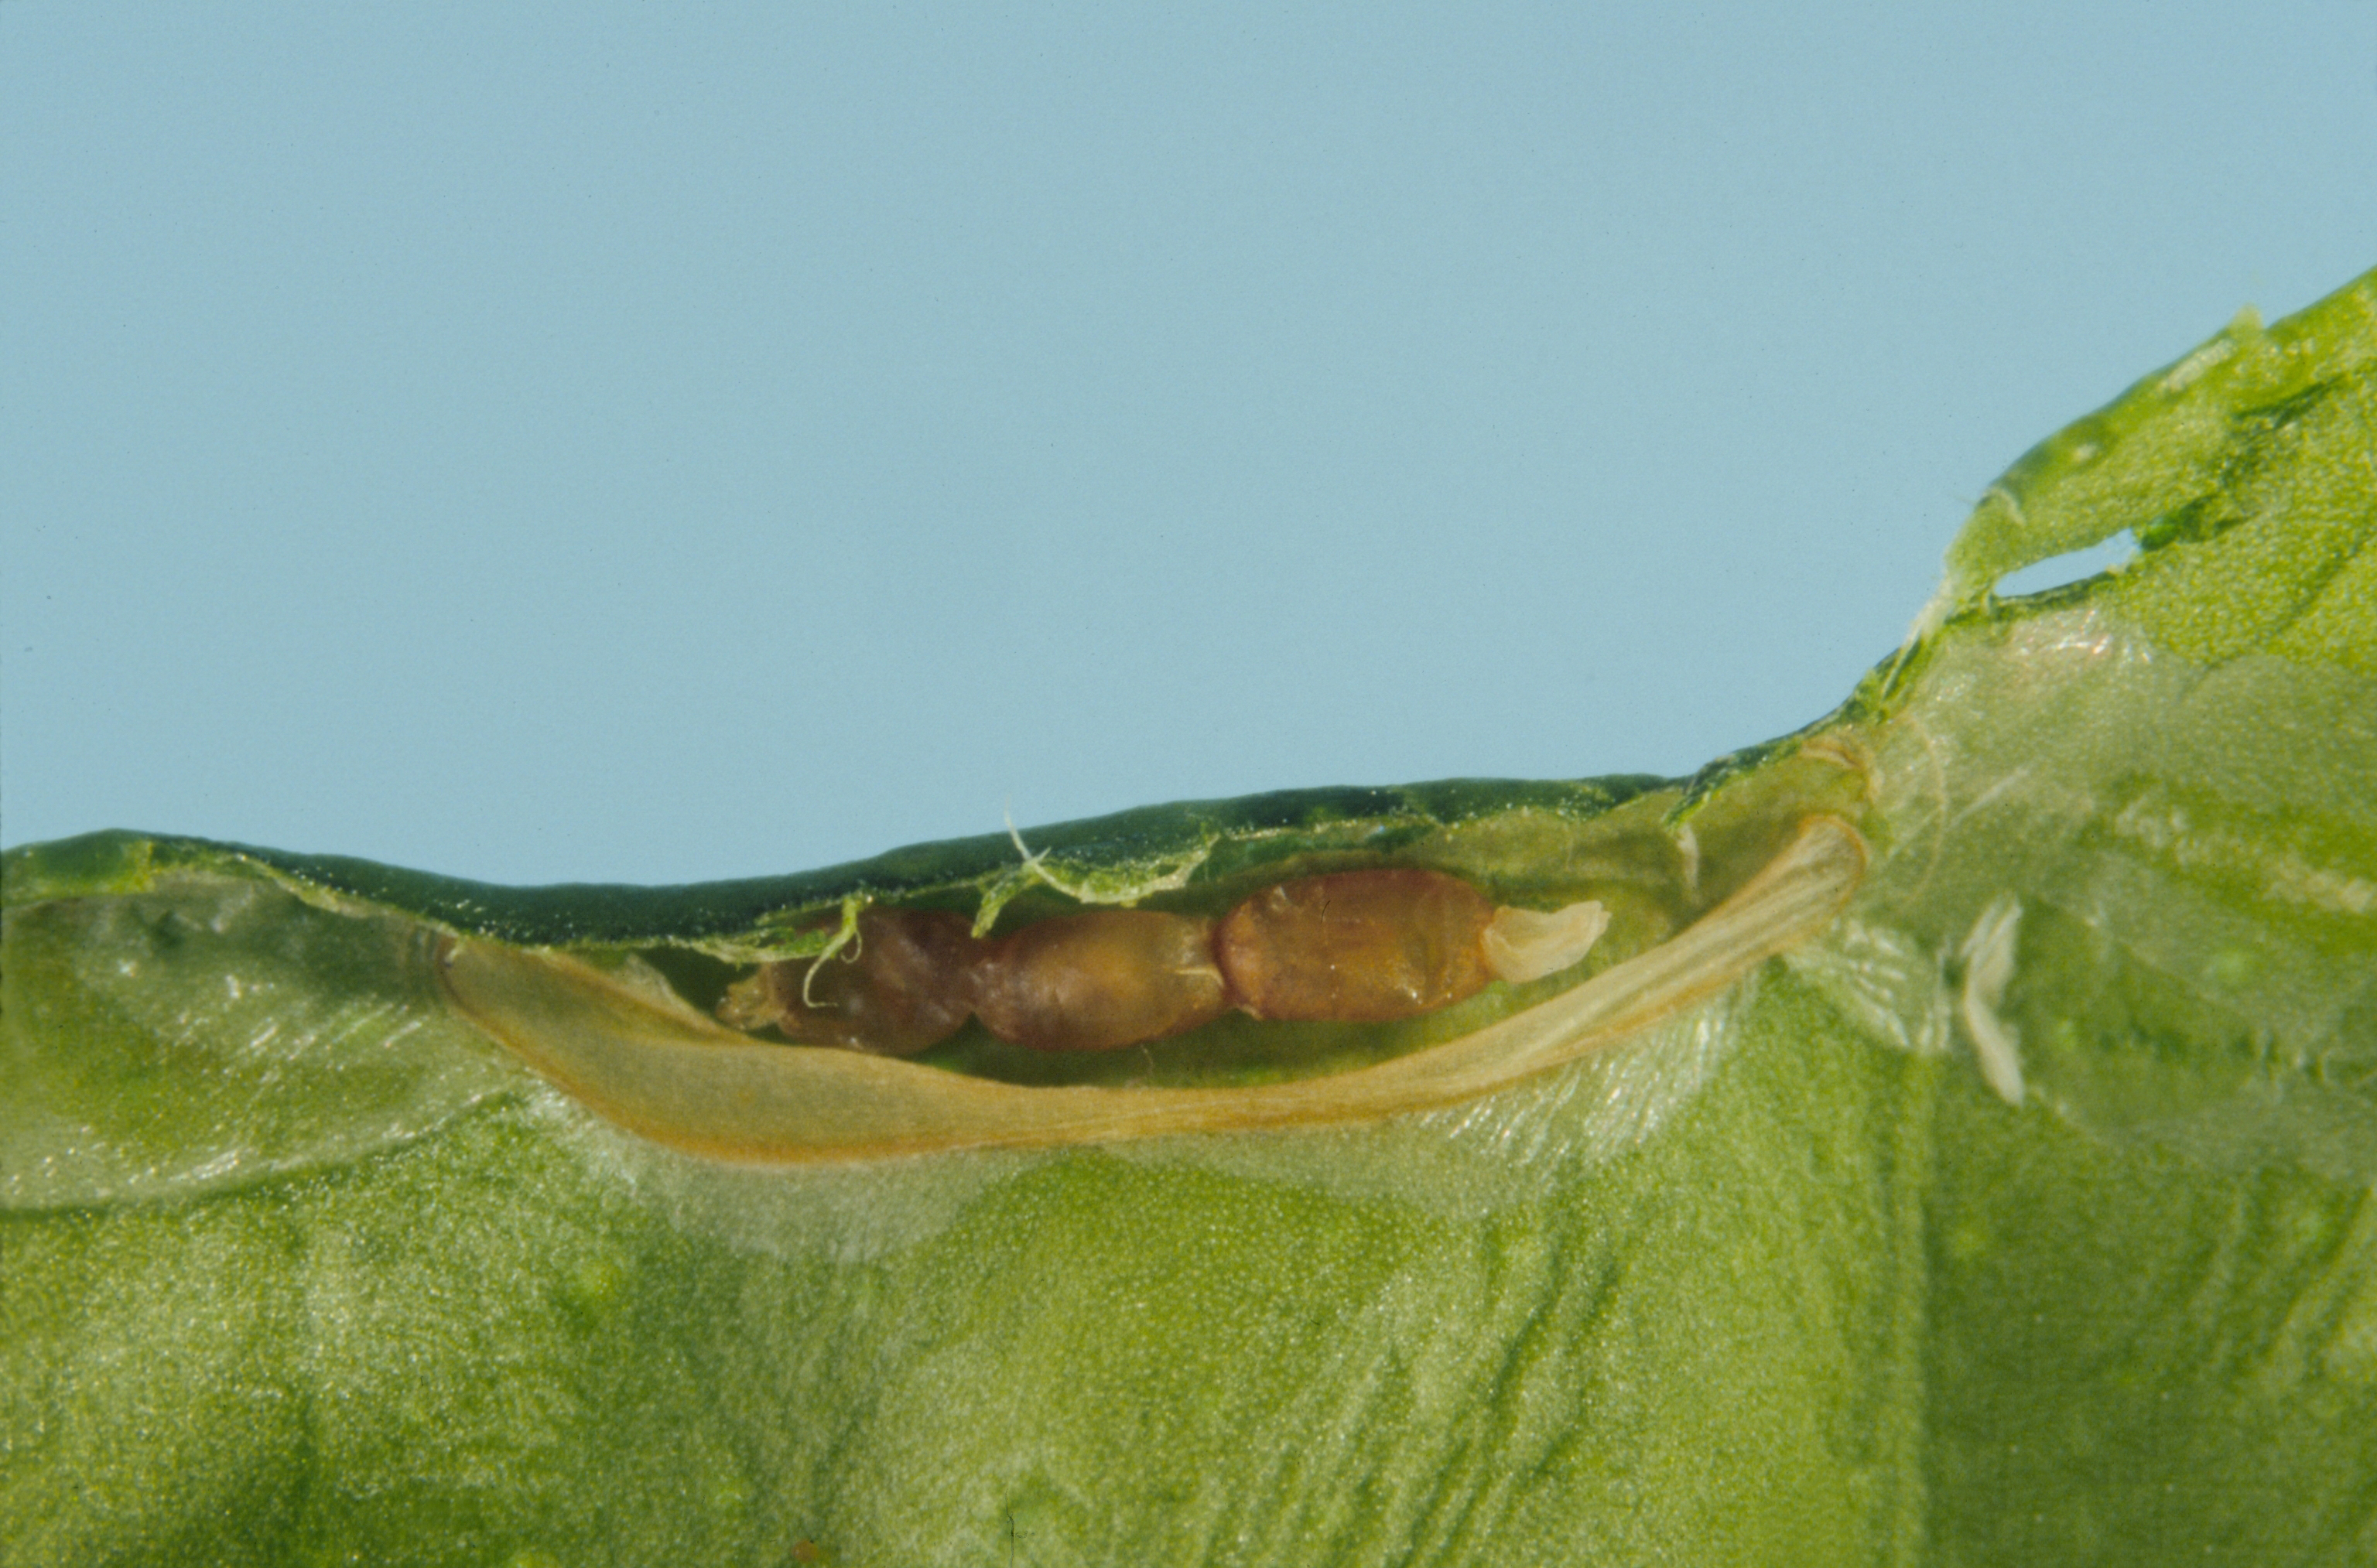 Figure 11. Ageniaspis citricola pupae. Photo: JW Lotz, Florida Department of Agriculture and Consumer Services, Bugwood.org.